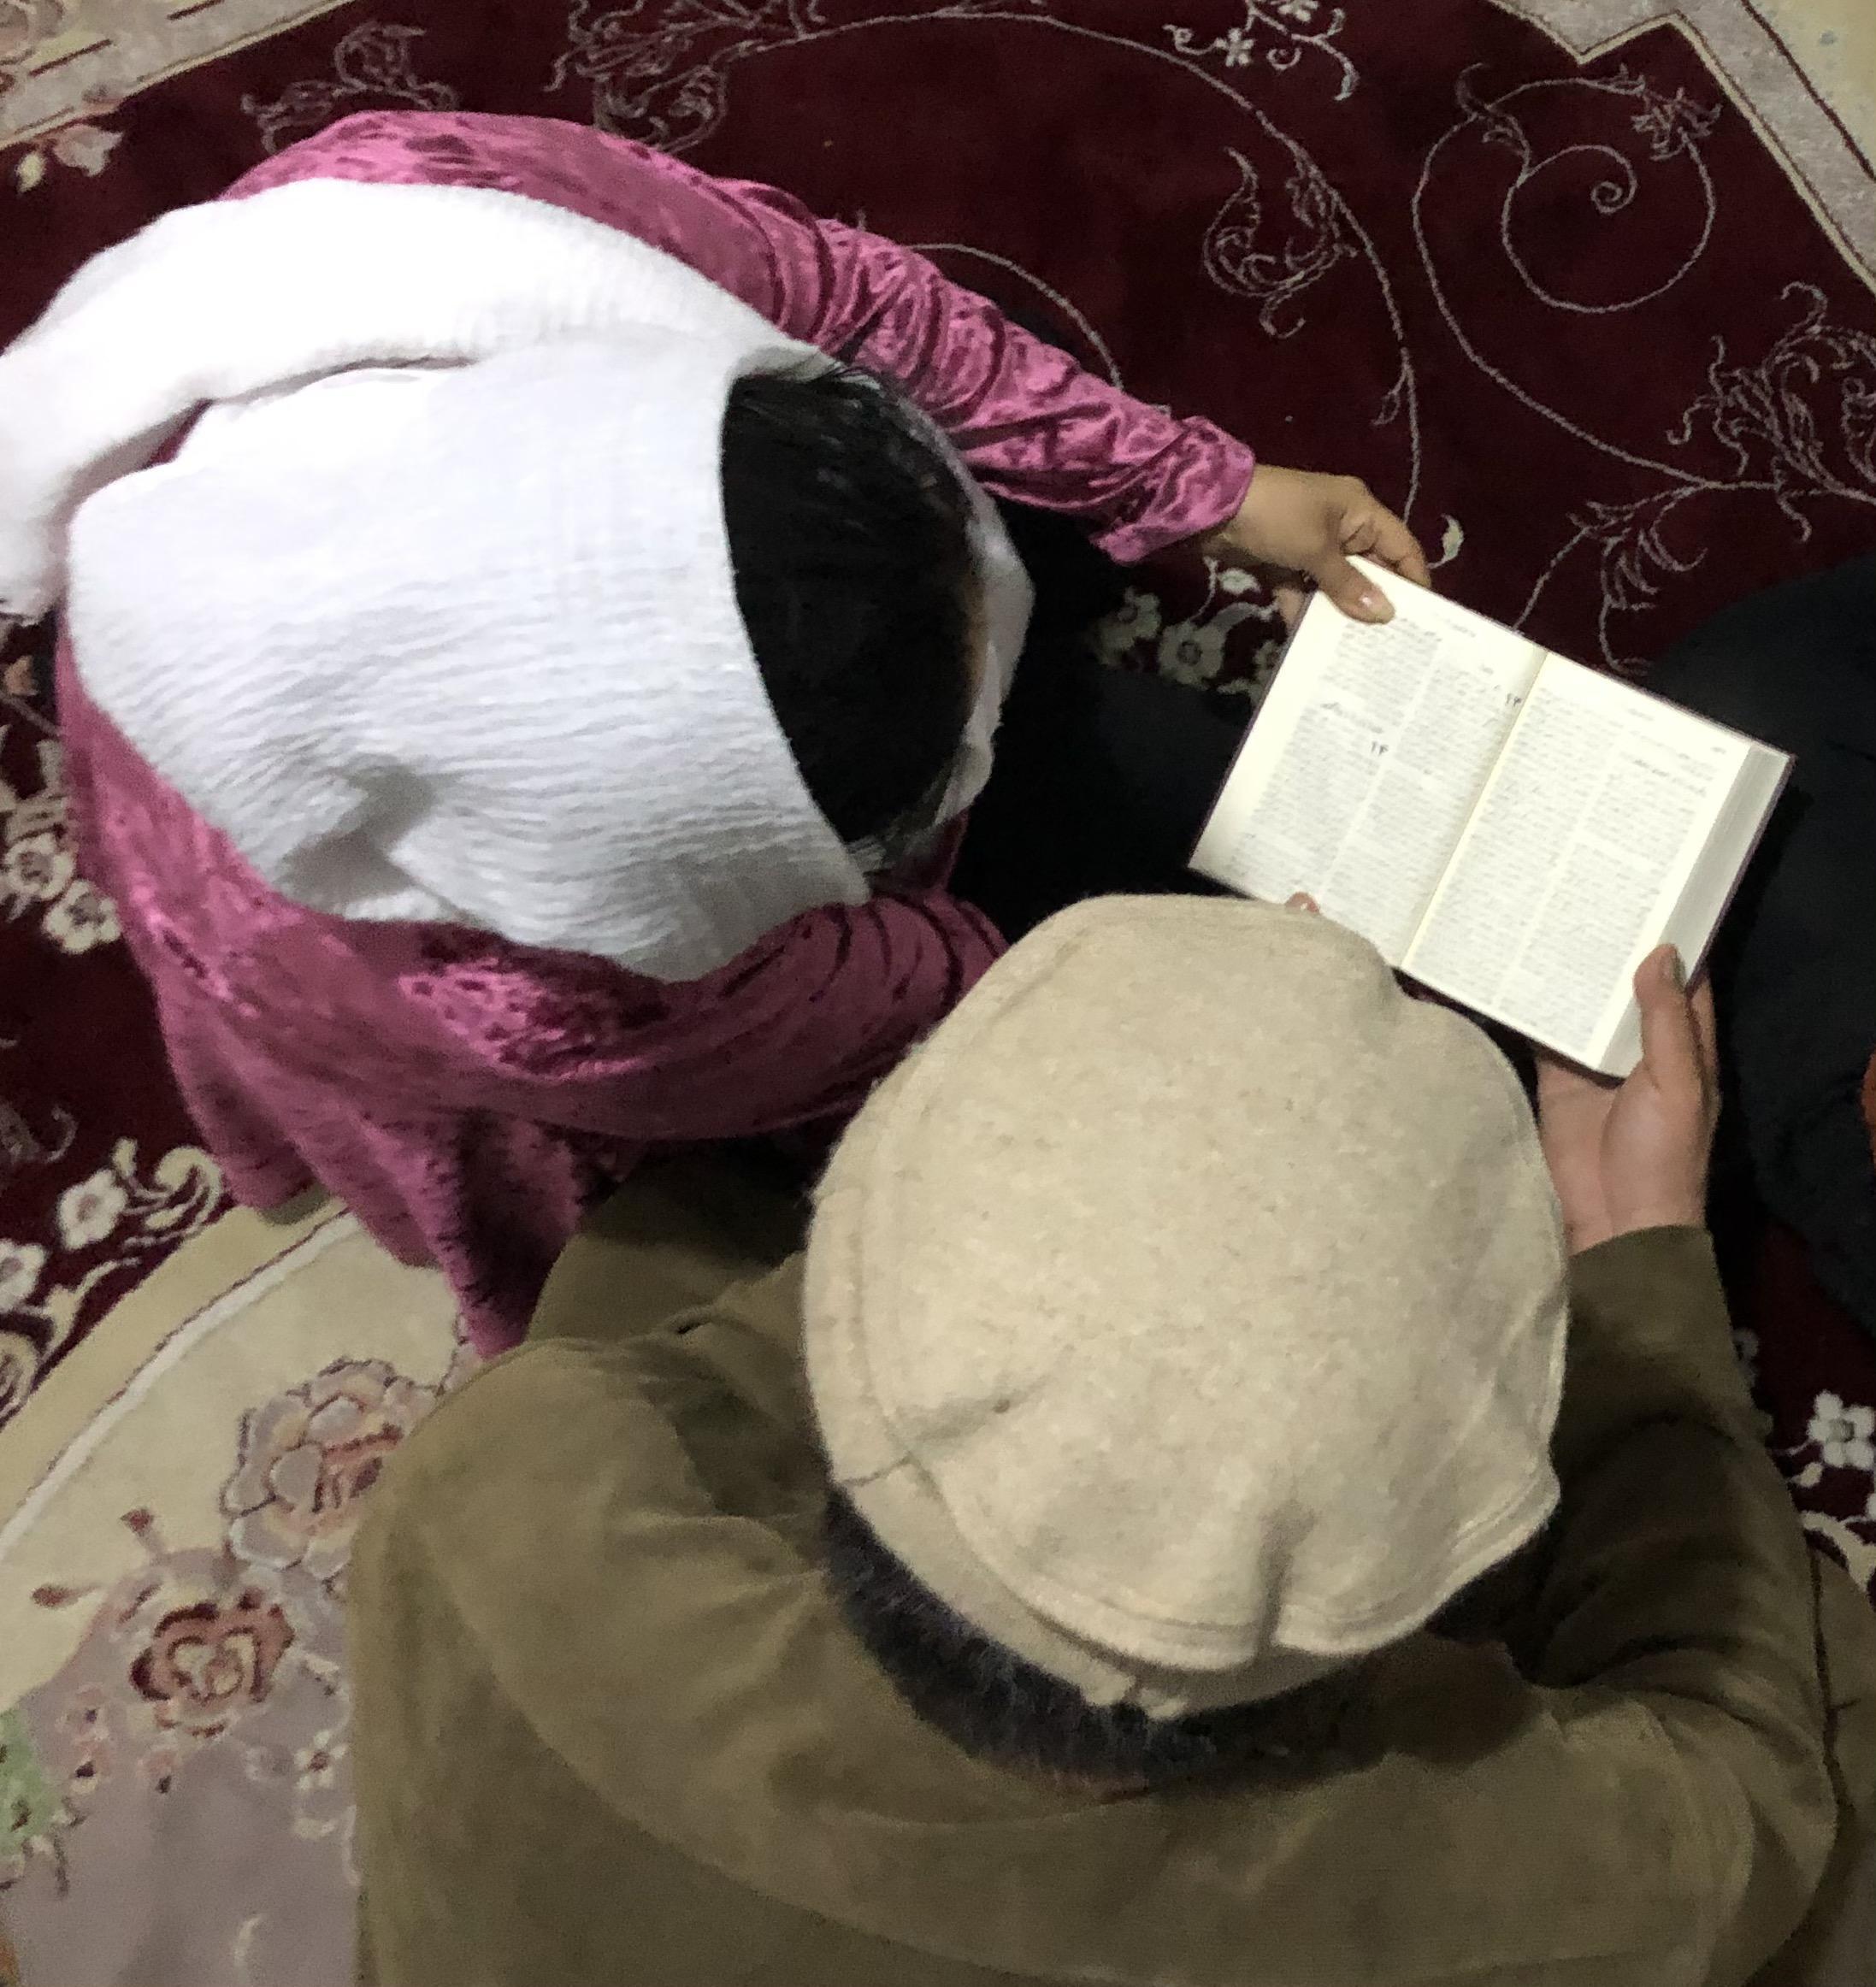 AFGHANISTAN  | NOV. 17, 2021 — “A Dangerous Time for Believers”